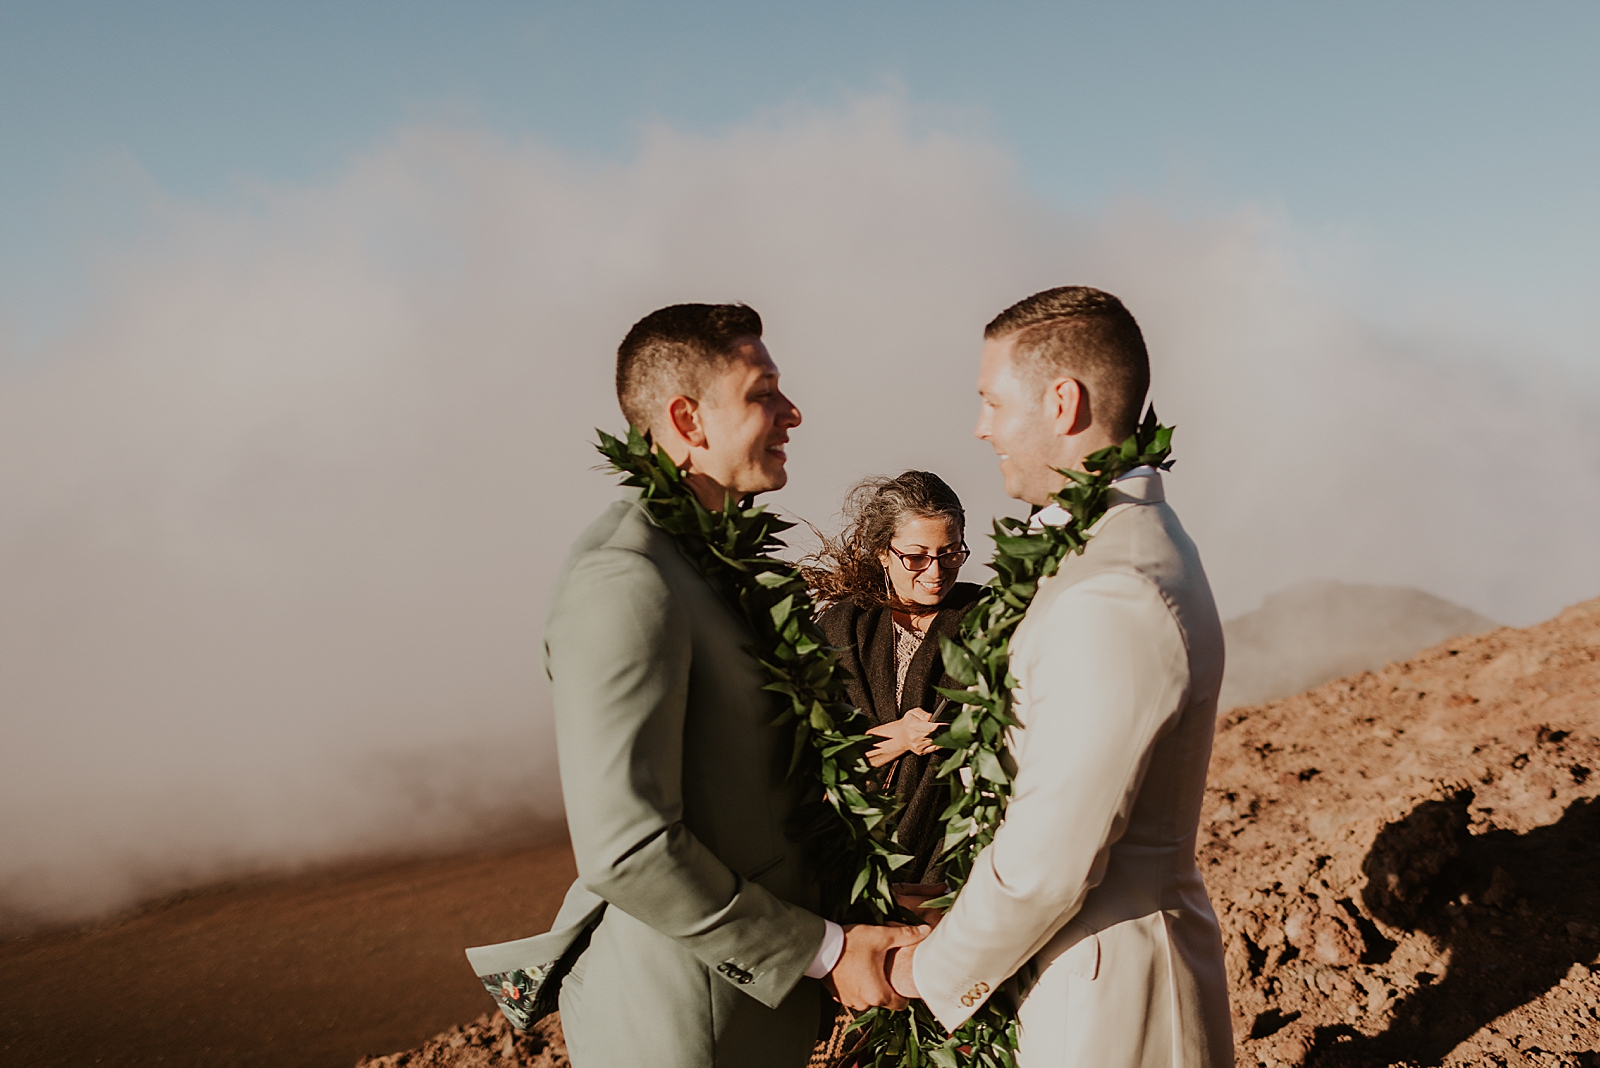 Grooms holding hands and looking at each other listening to the officiant